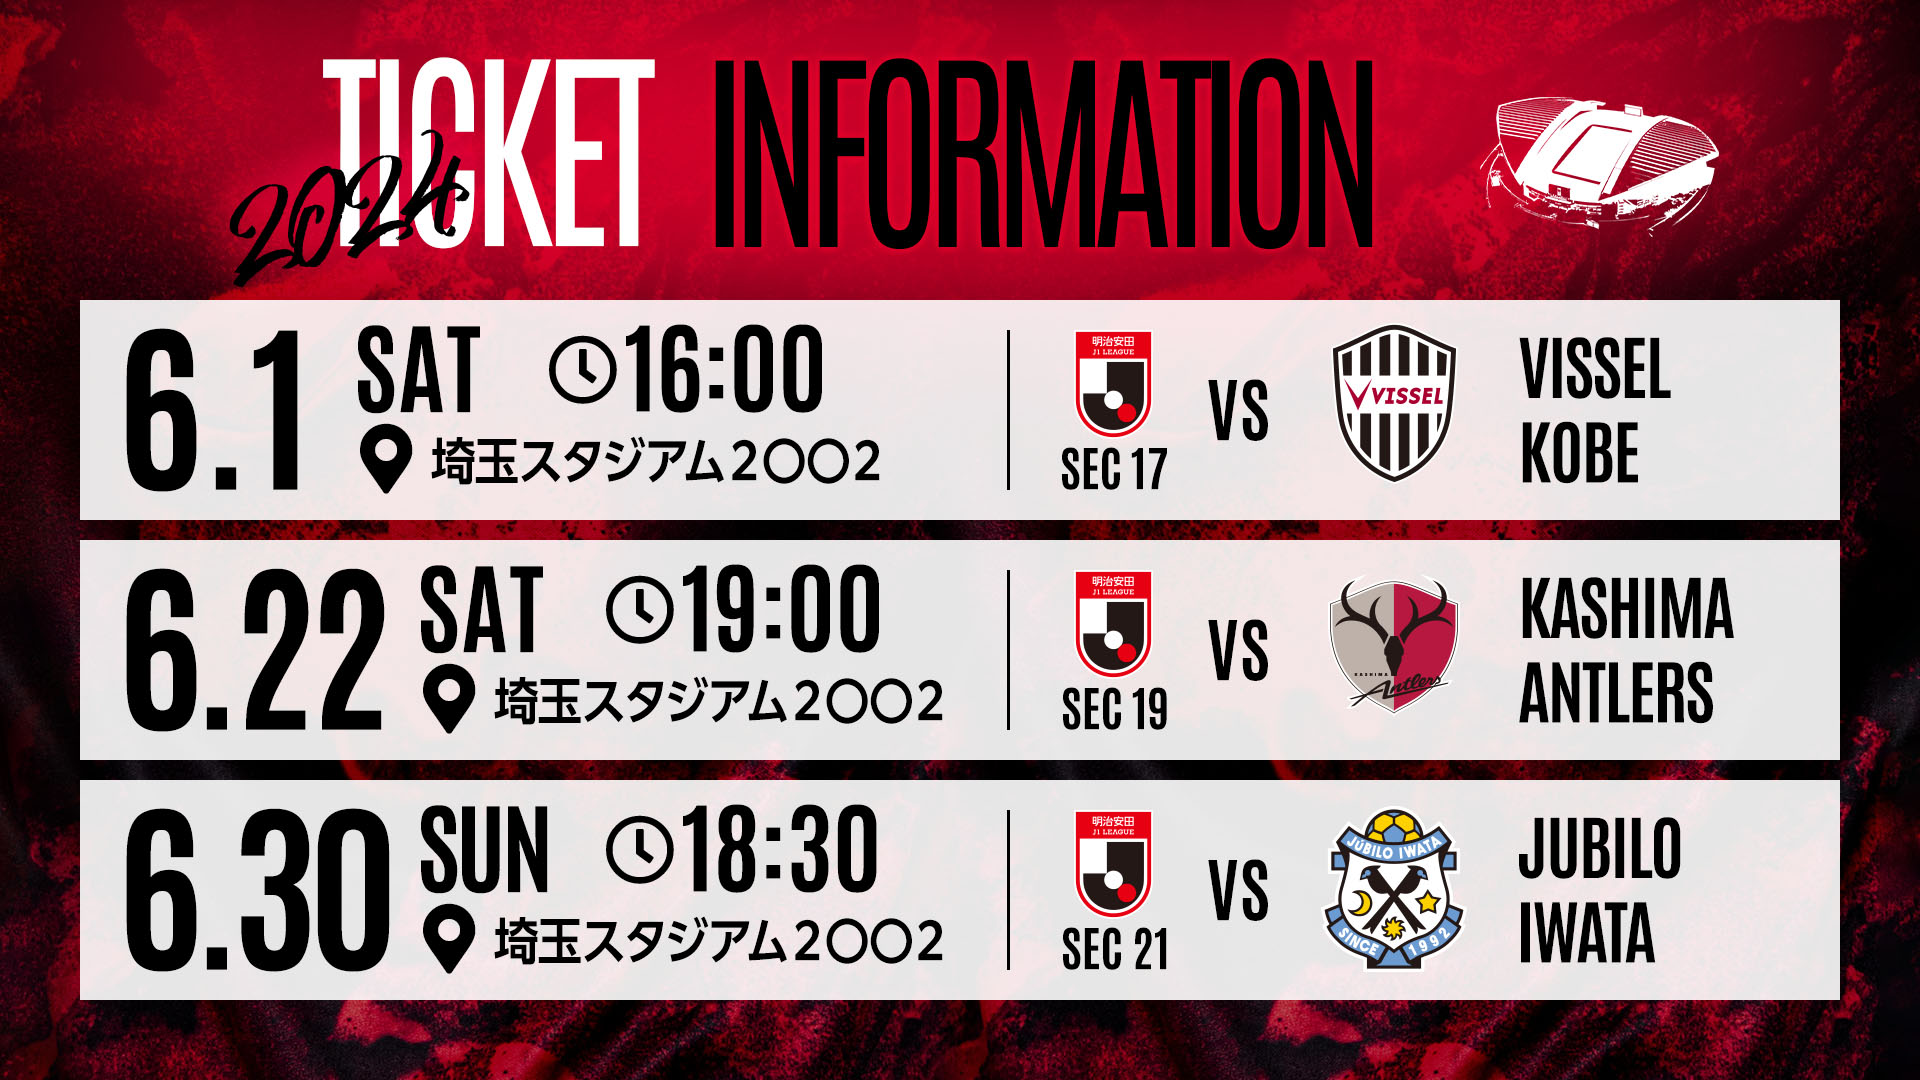 Ticket sales for home games in June (J1 League)